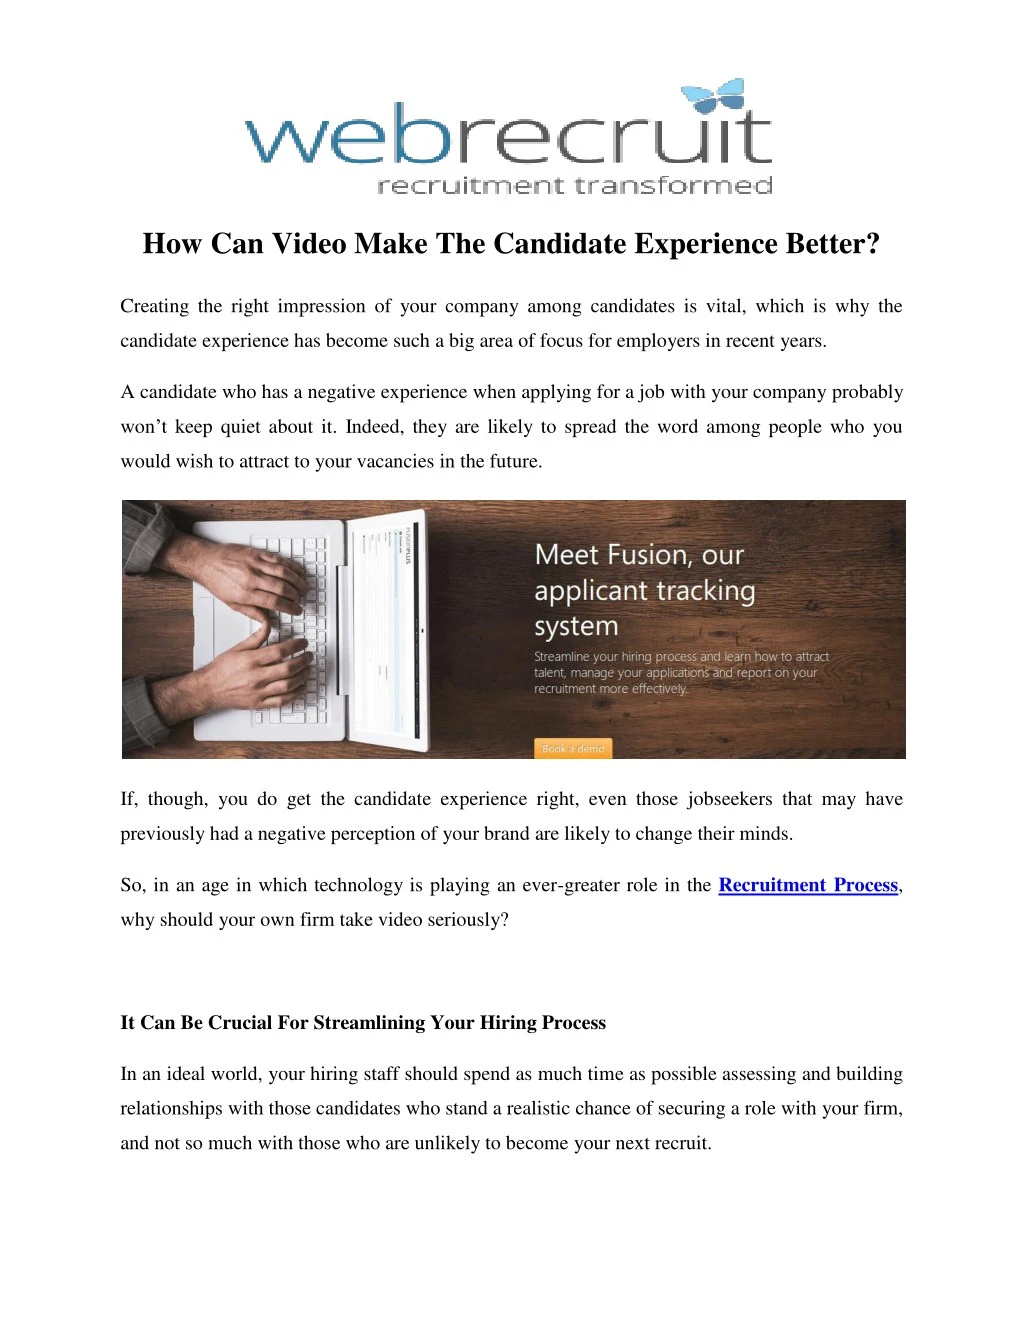 how can video make the candidate experience better